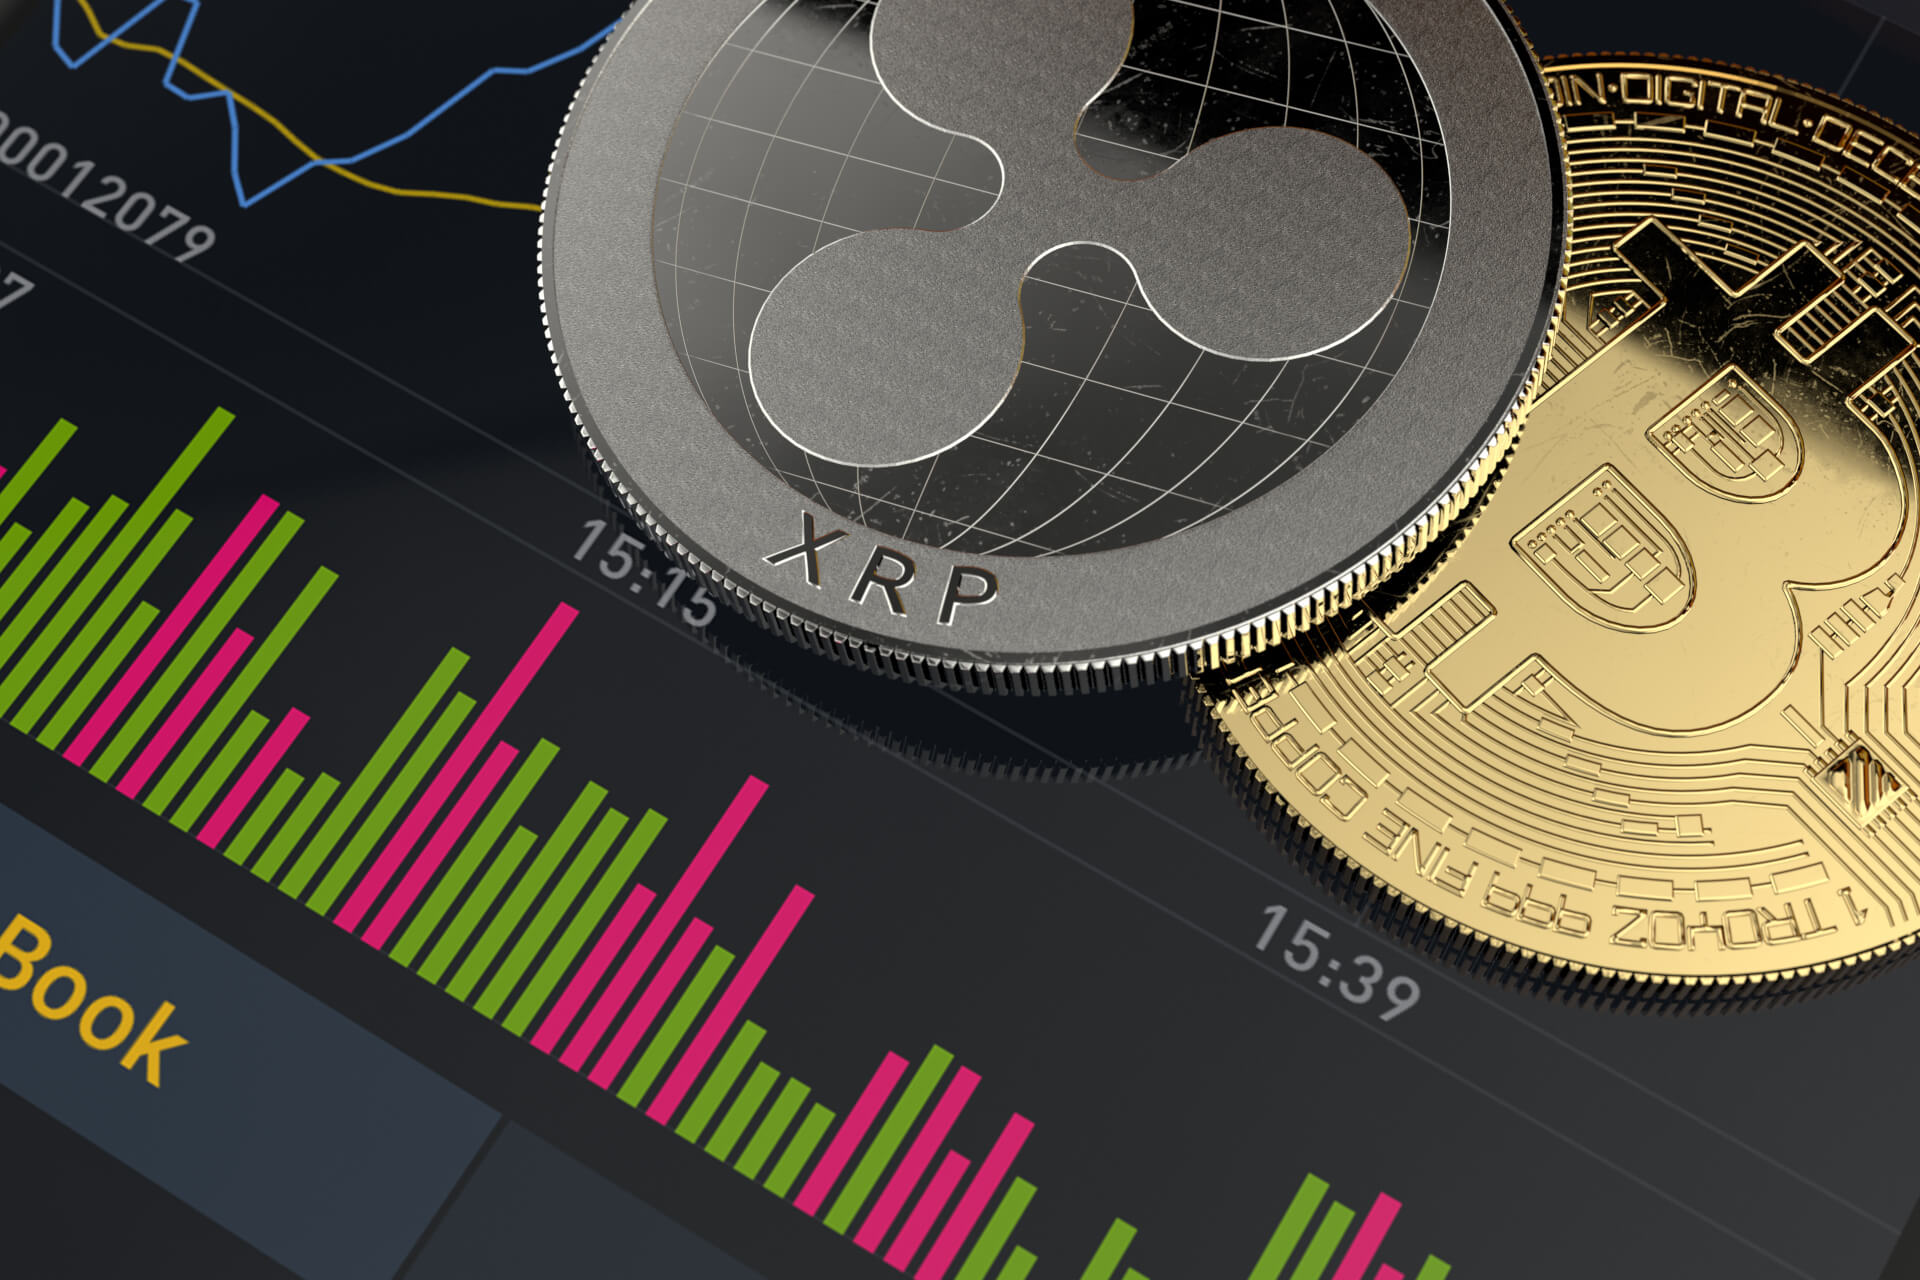 Bitcoin and XRP coins on mobile app free image download